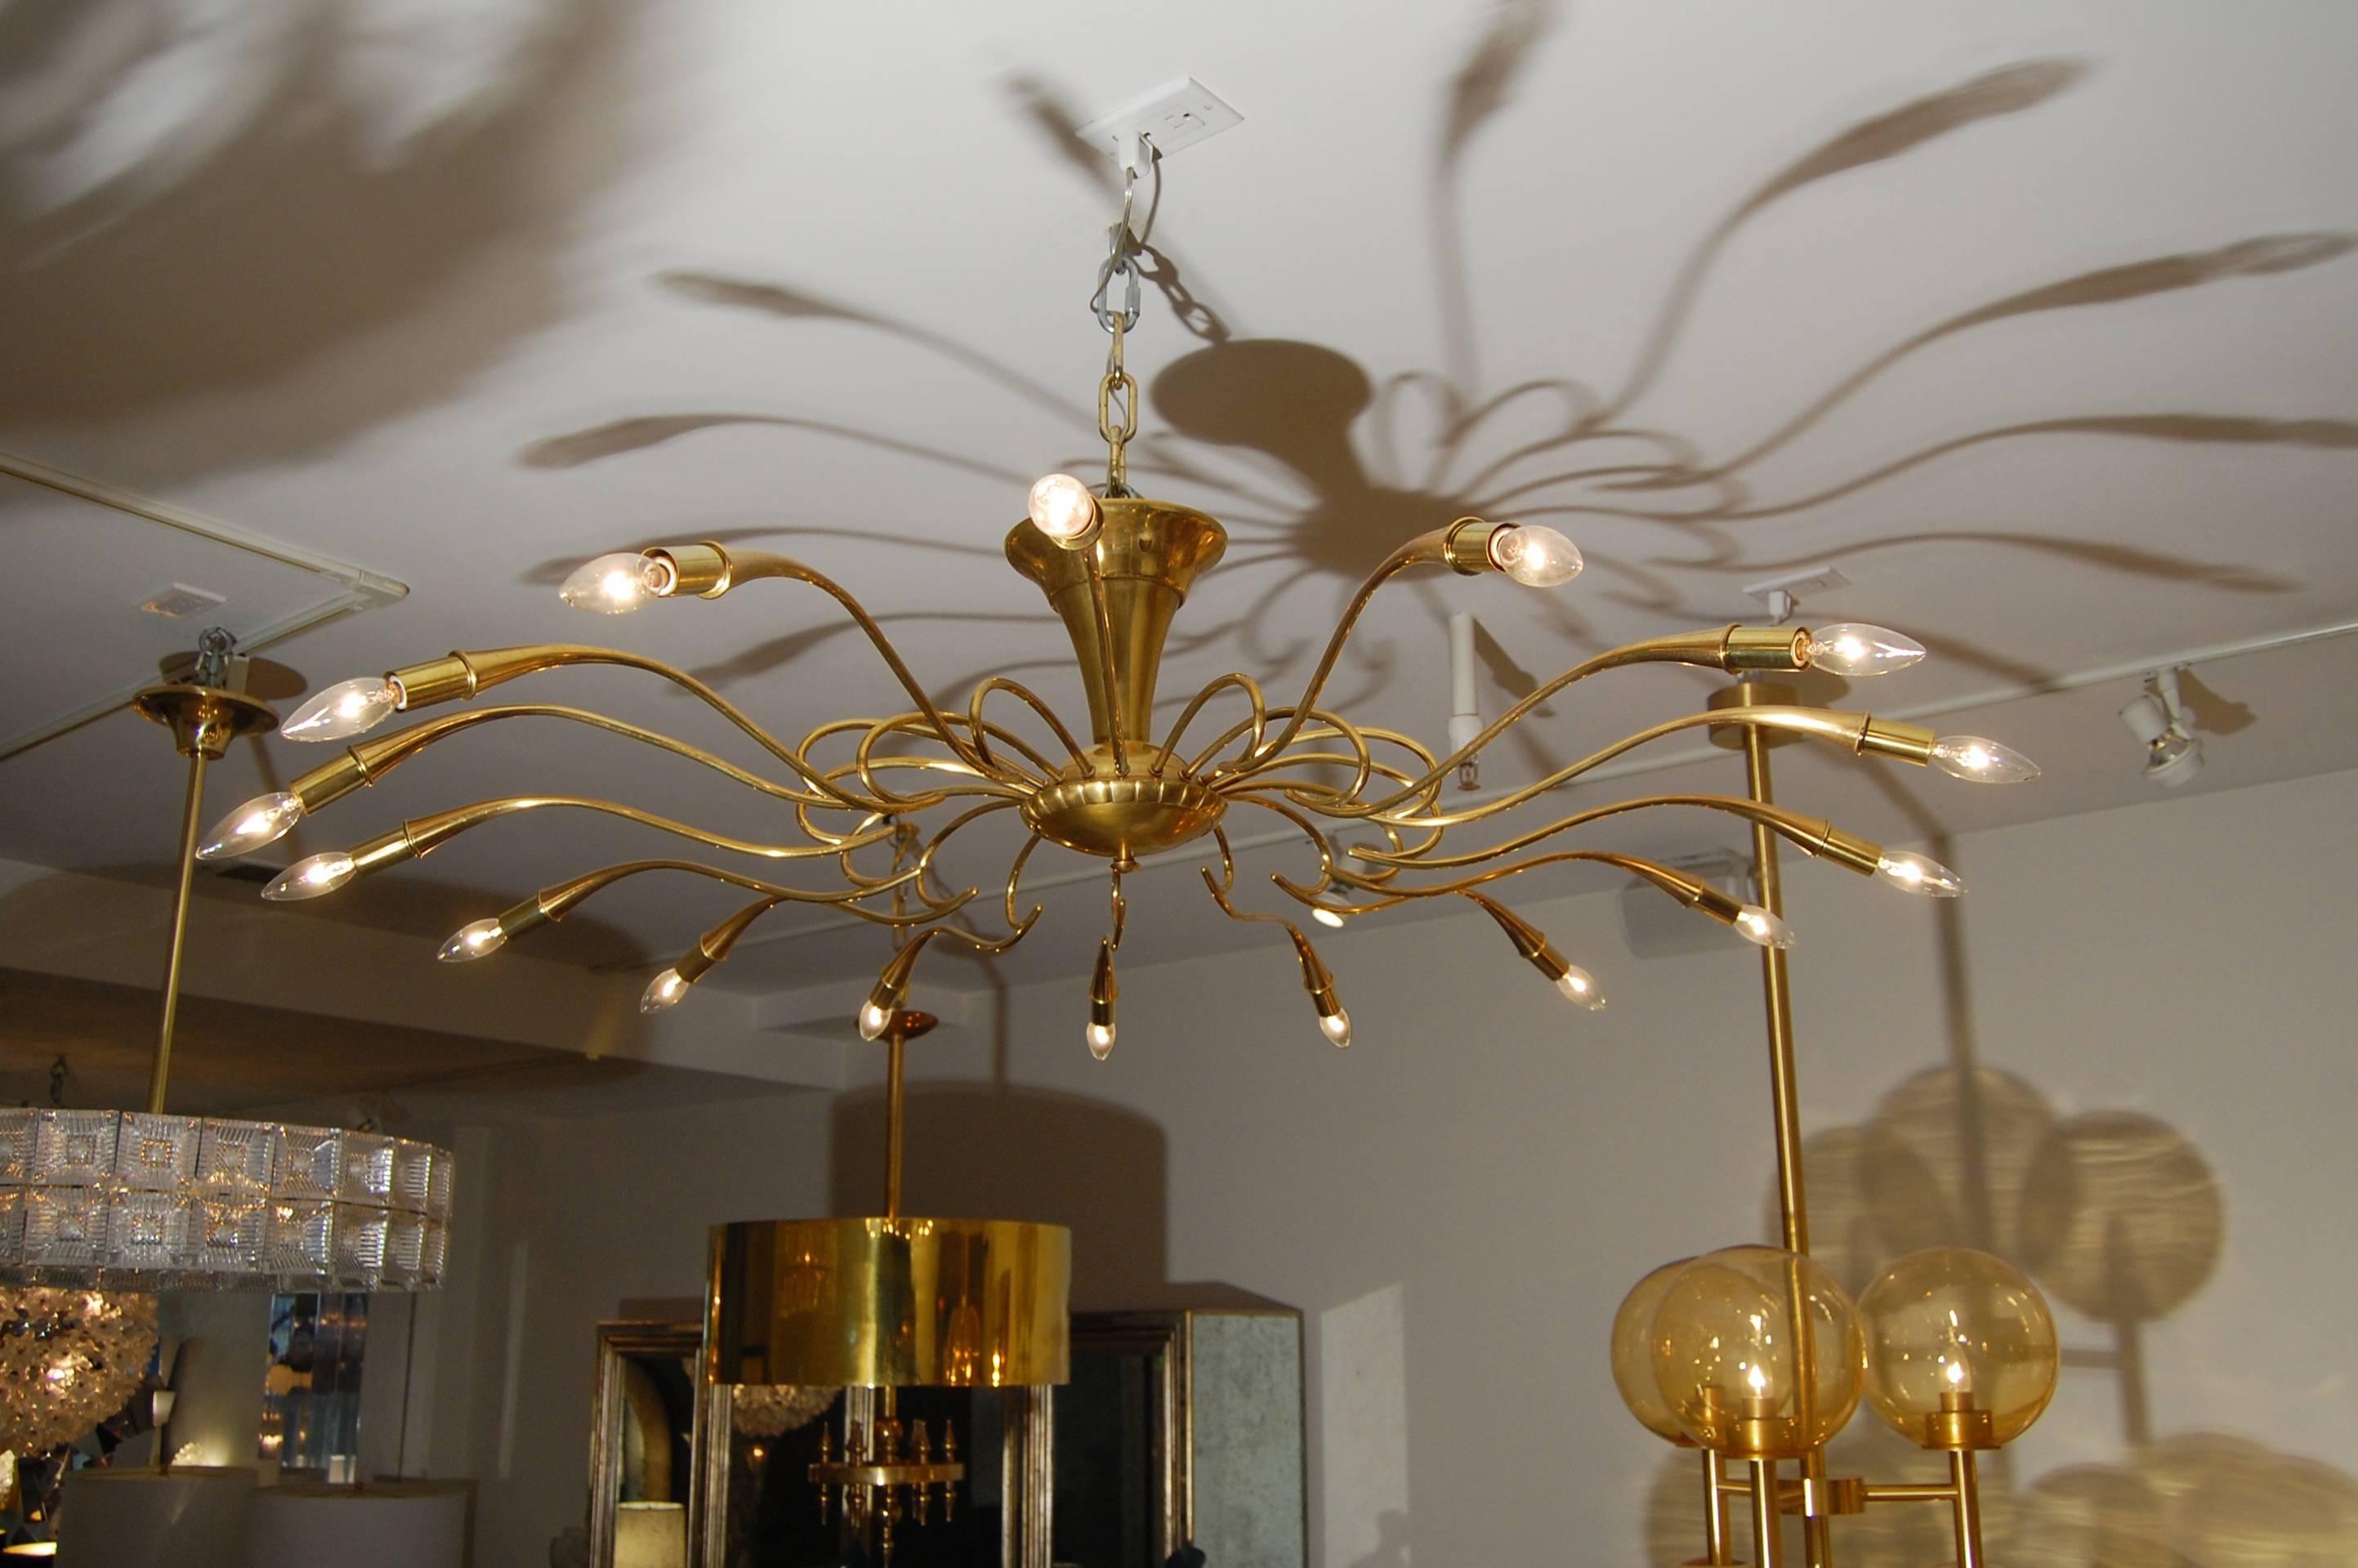 A large brass ceiling fixture with multiple curvaceous arms by Oscar Torlasco, Italian, circa 1960s.

